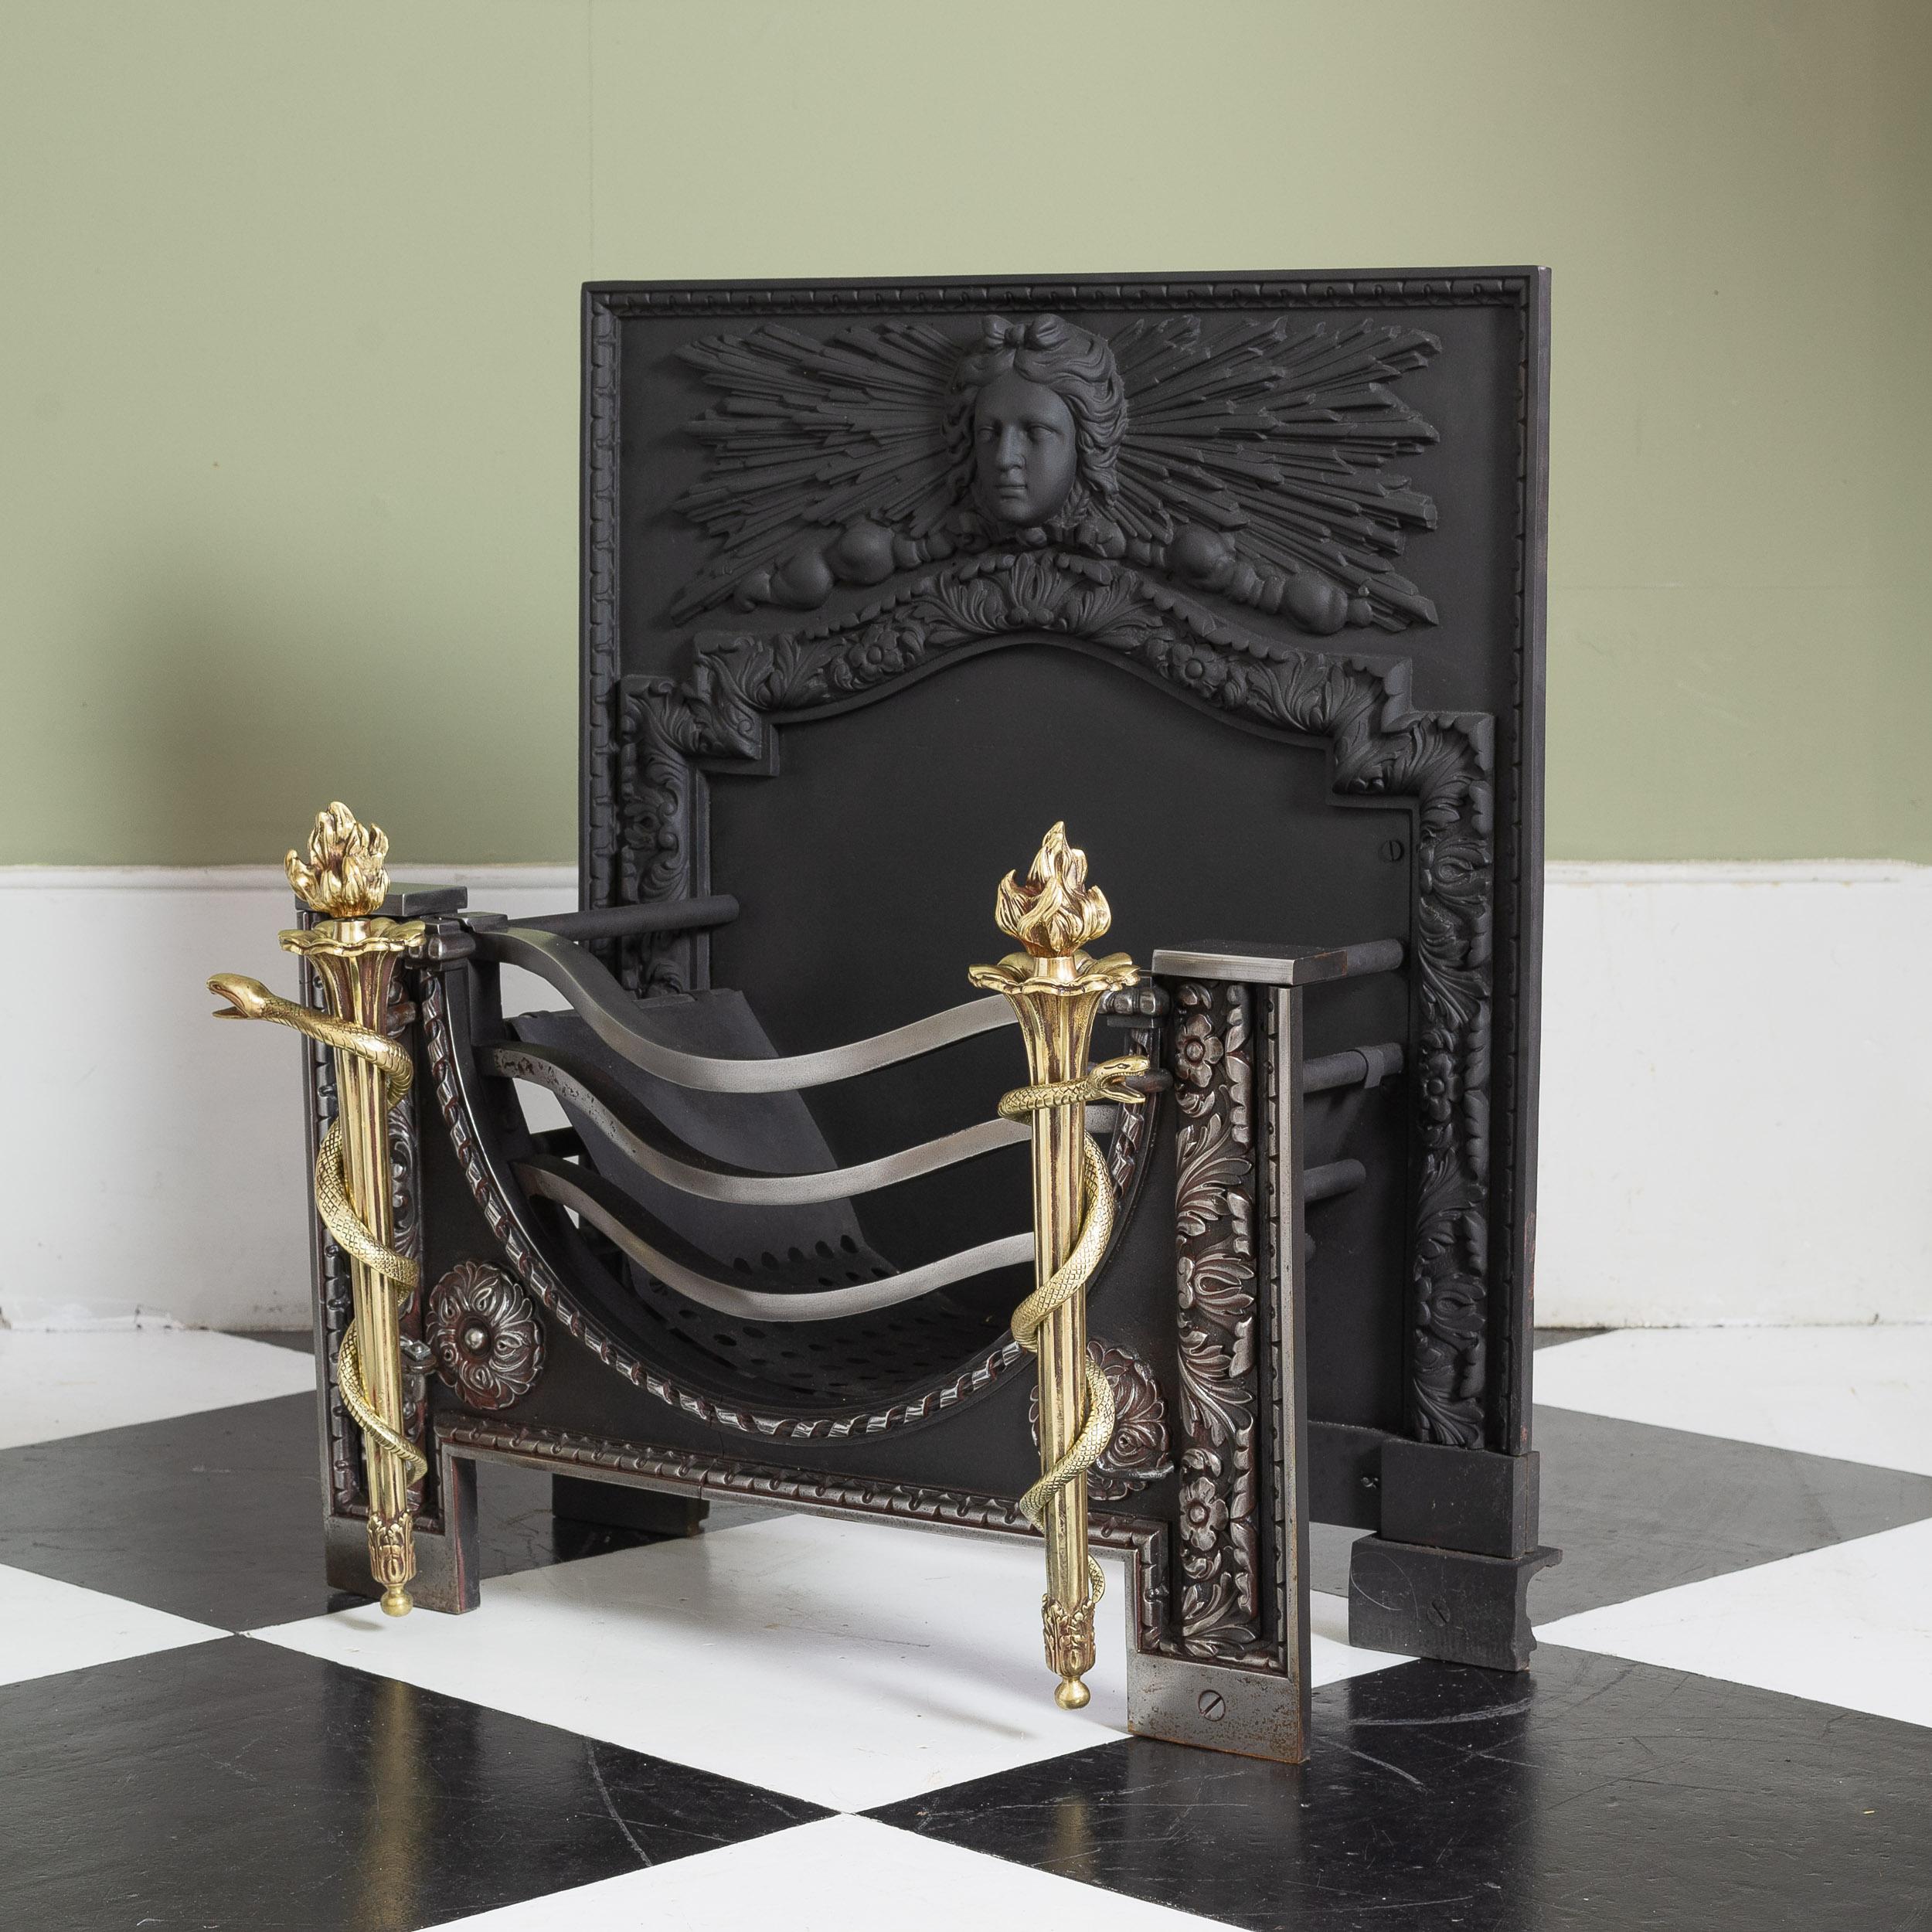 Nineteenth century Baroque Cast Iron and Brass Fire Grate In Good Condition For Sale In London, GB